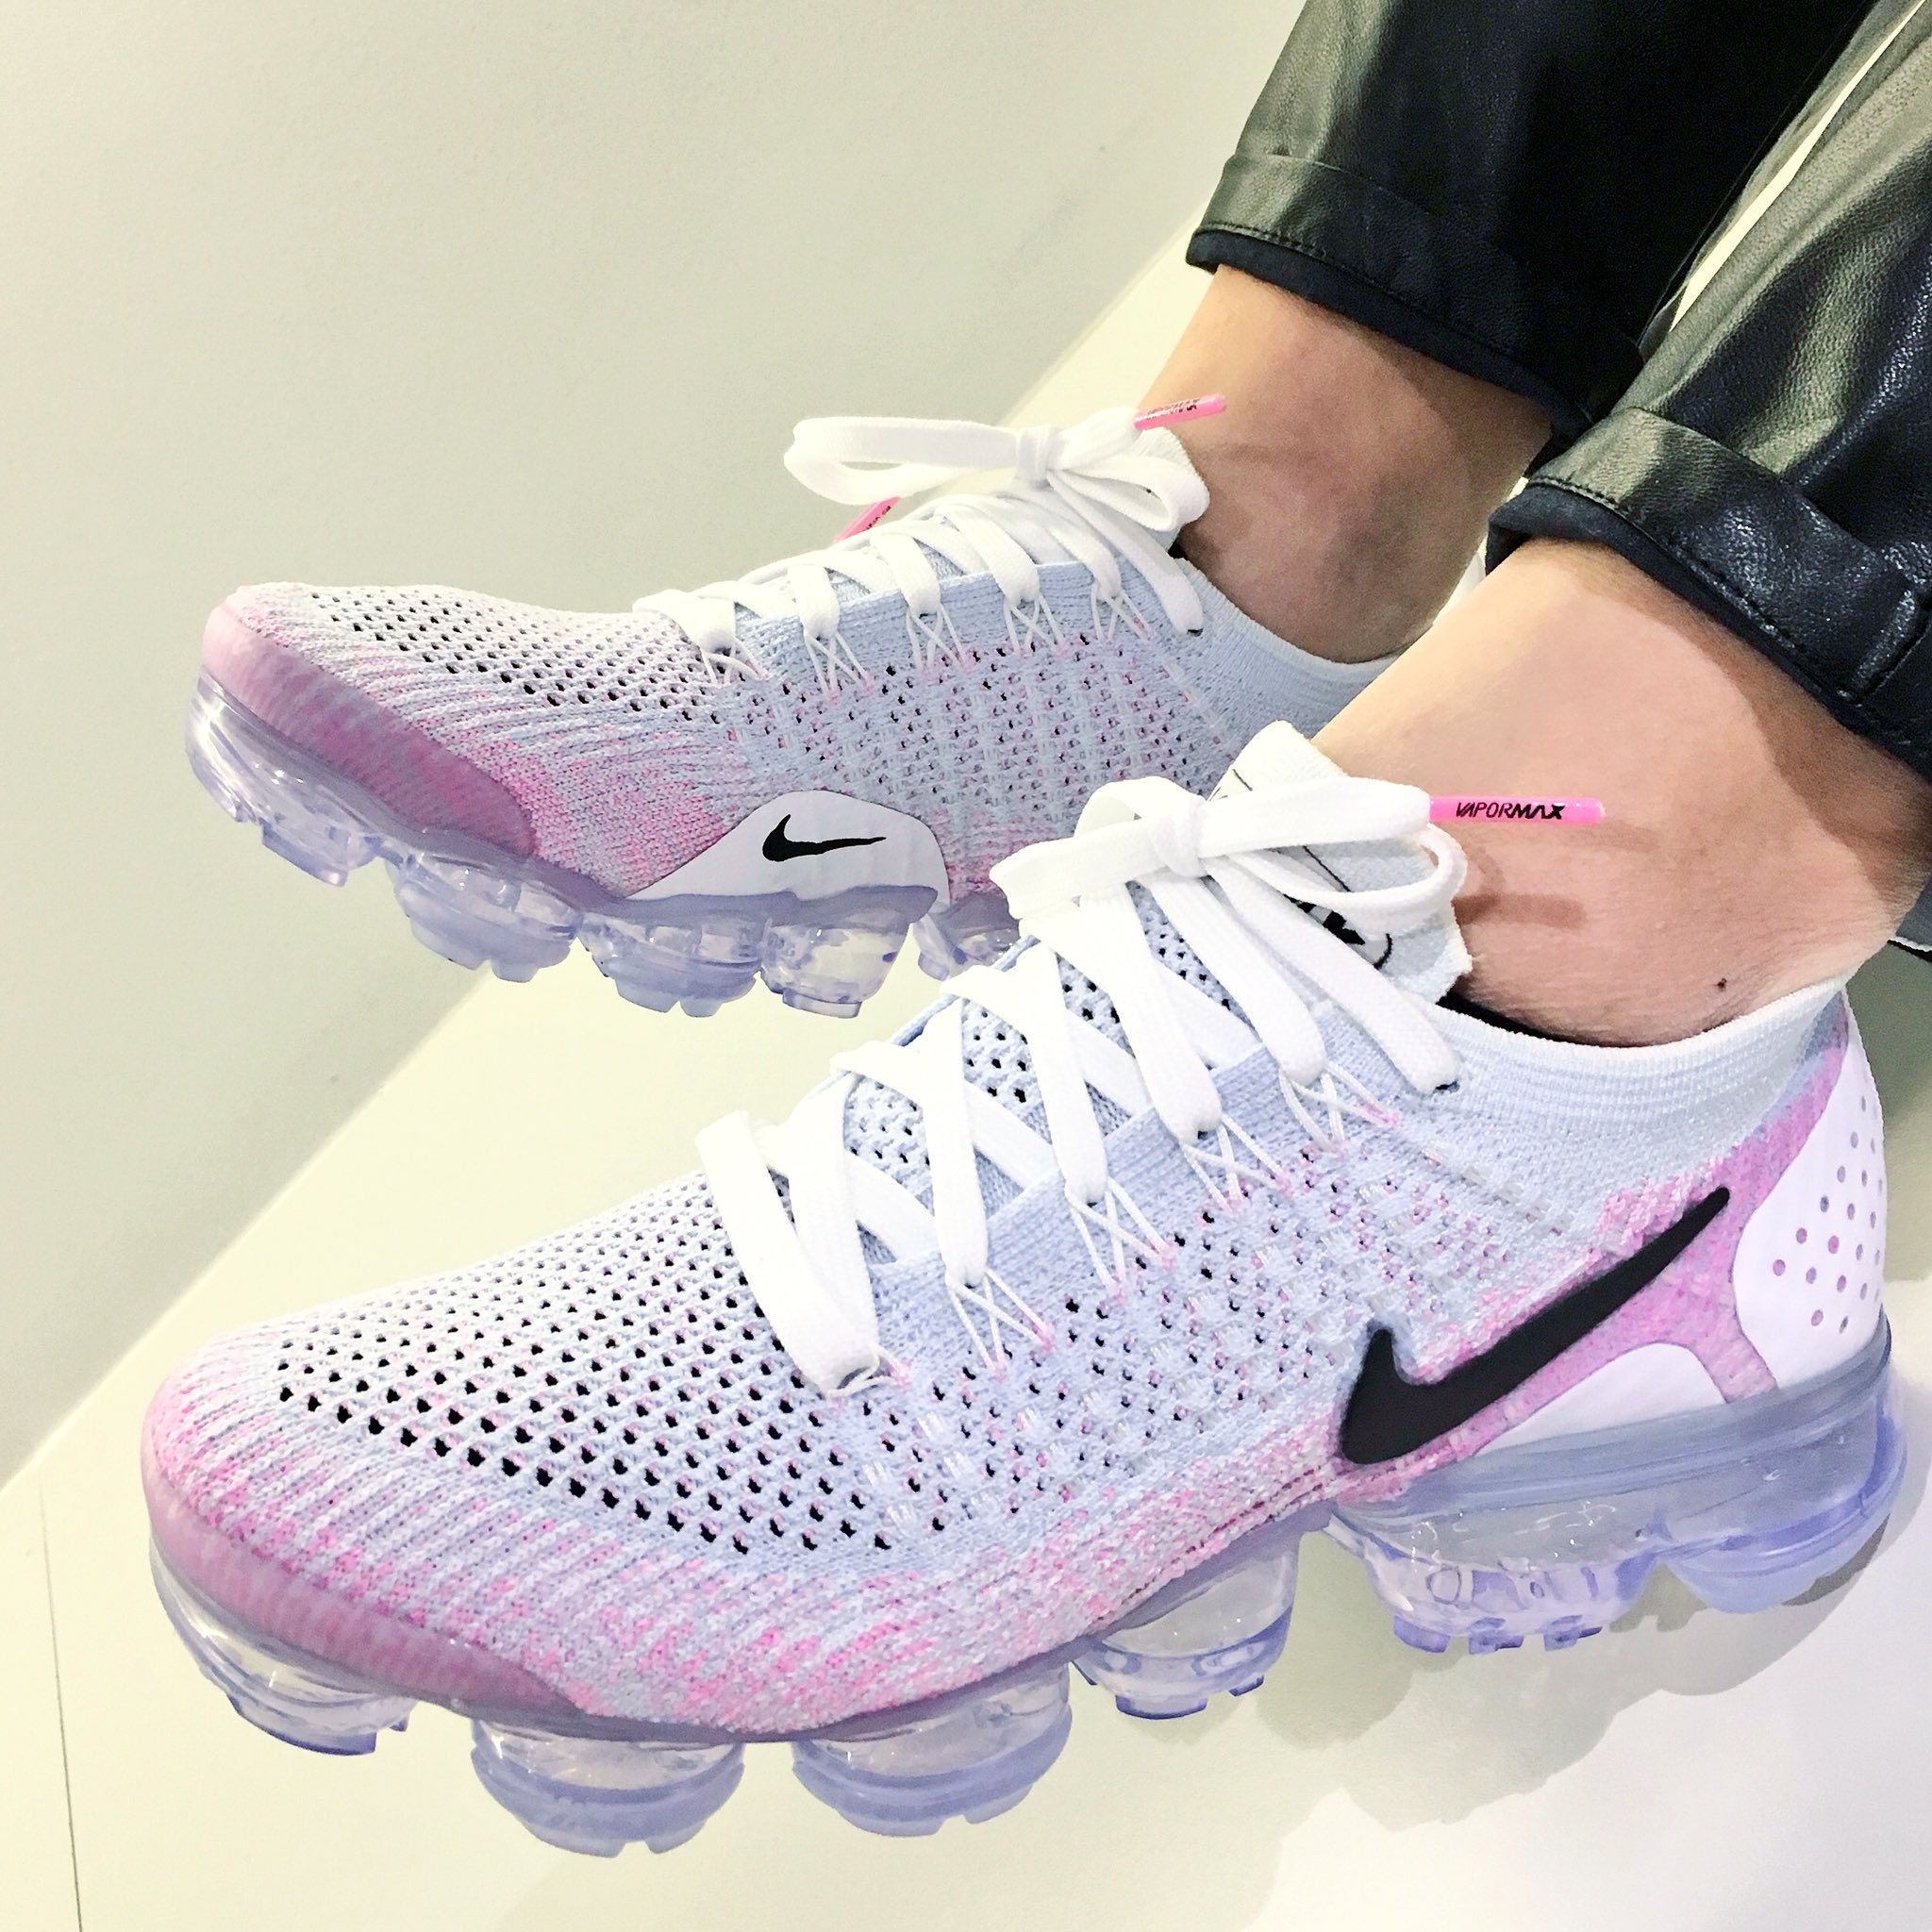 Foot Locker Women on Twitter: "I mean come on!💓 pink beam/igloo Nike Vapormax 2 babies are now available in select stores https://t.co/8Z6R13BmzI #SheCanDoBoth https://t.co/QTaQRbS4TW" / Twitter